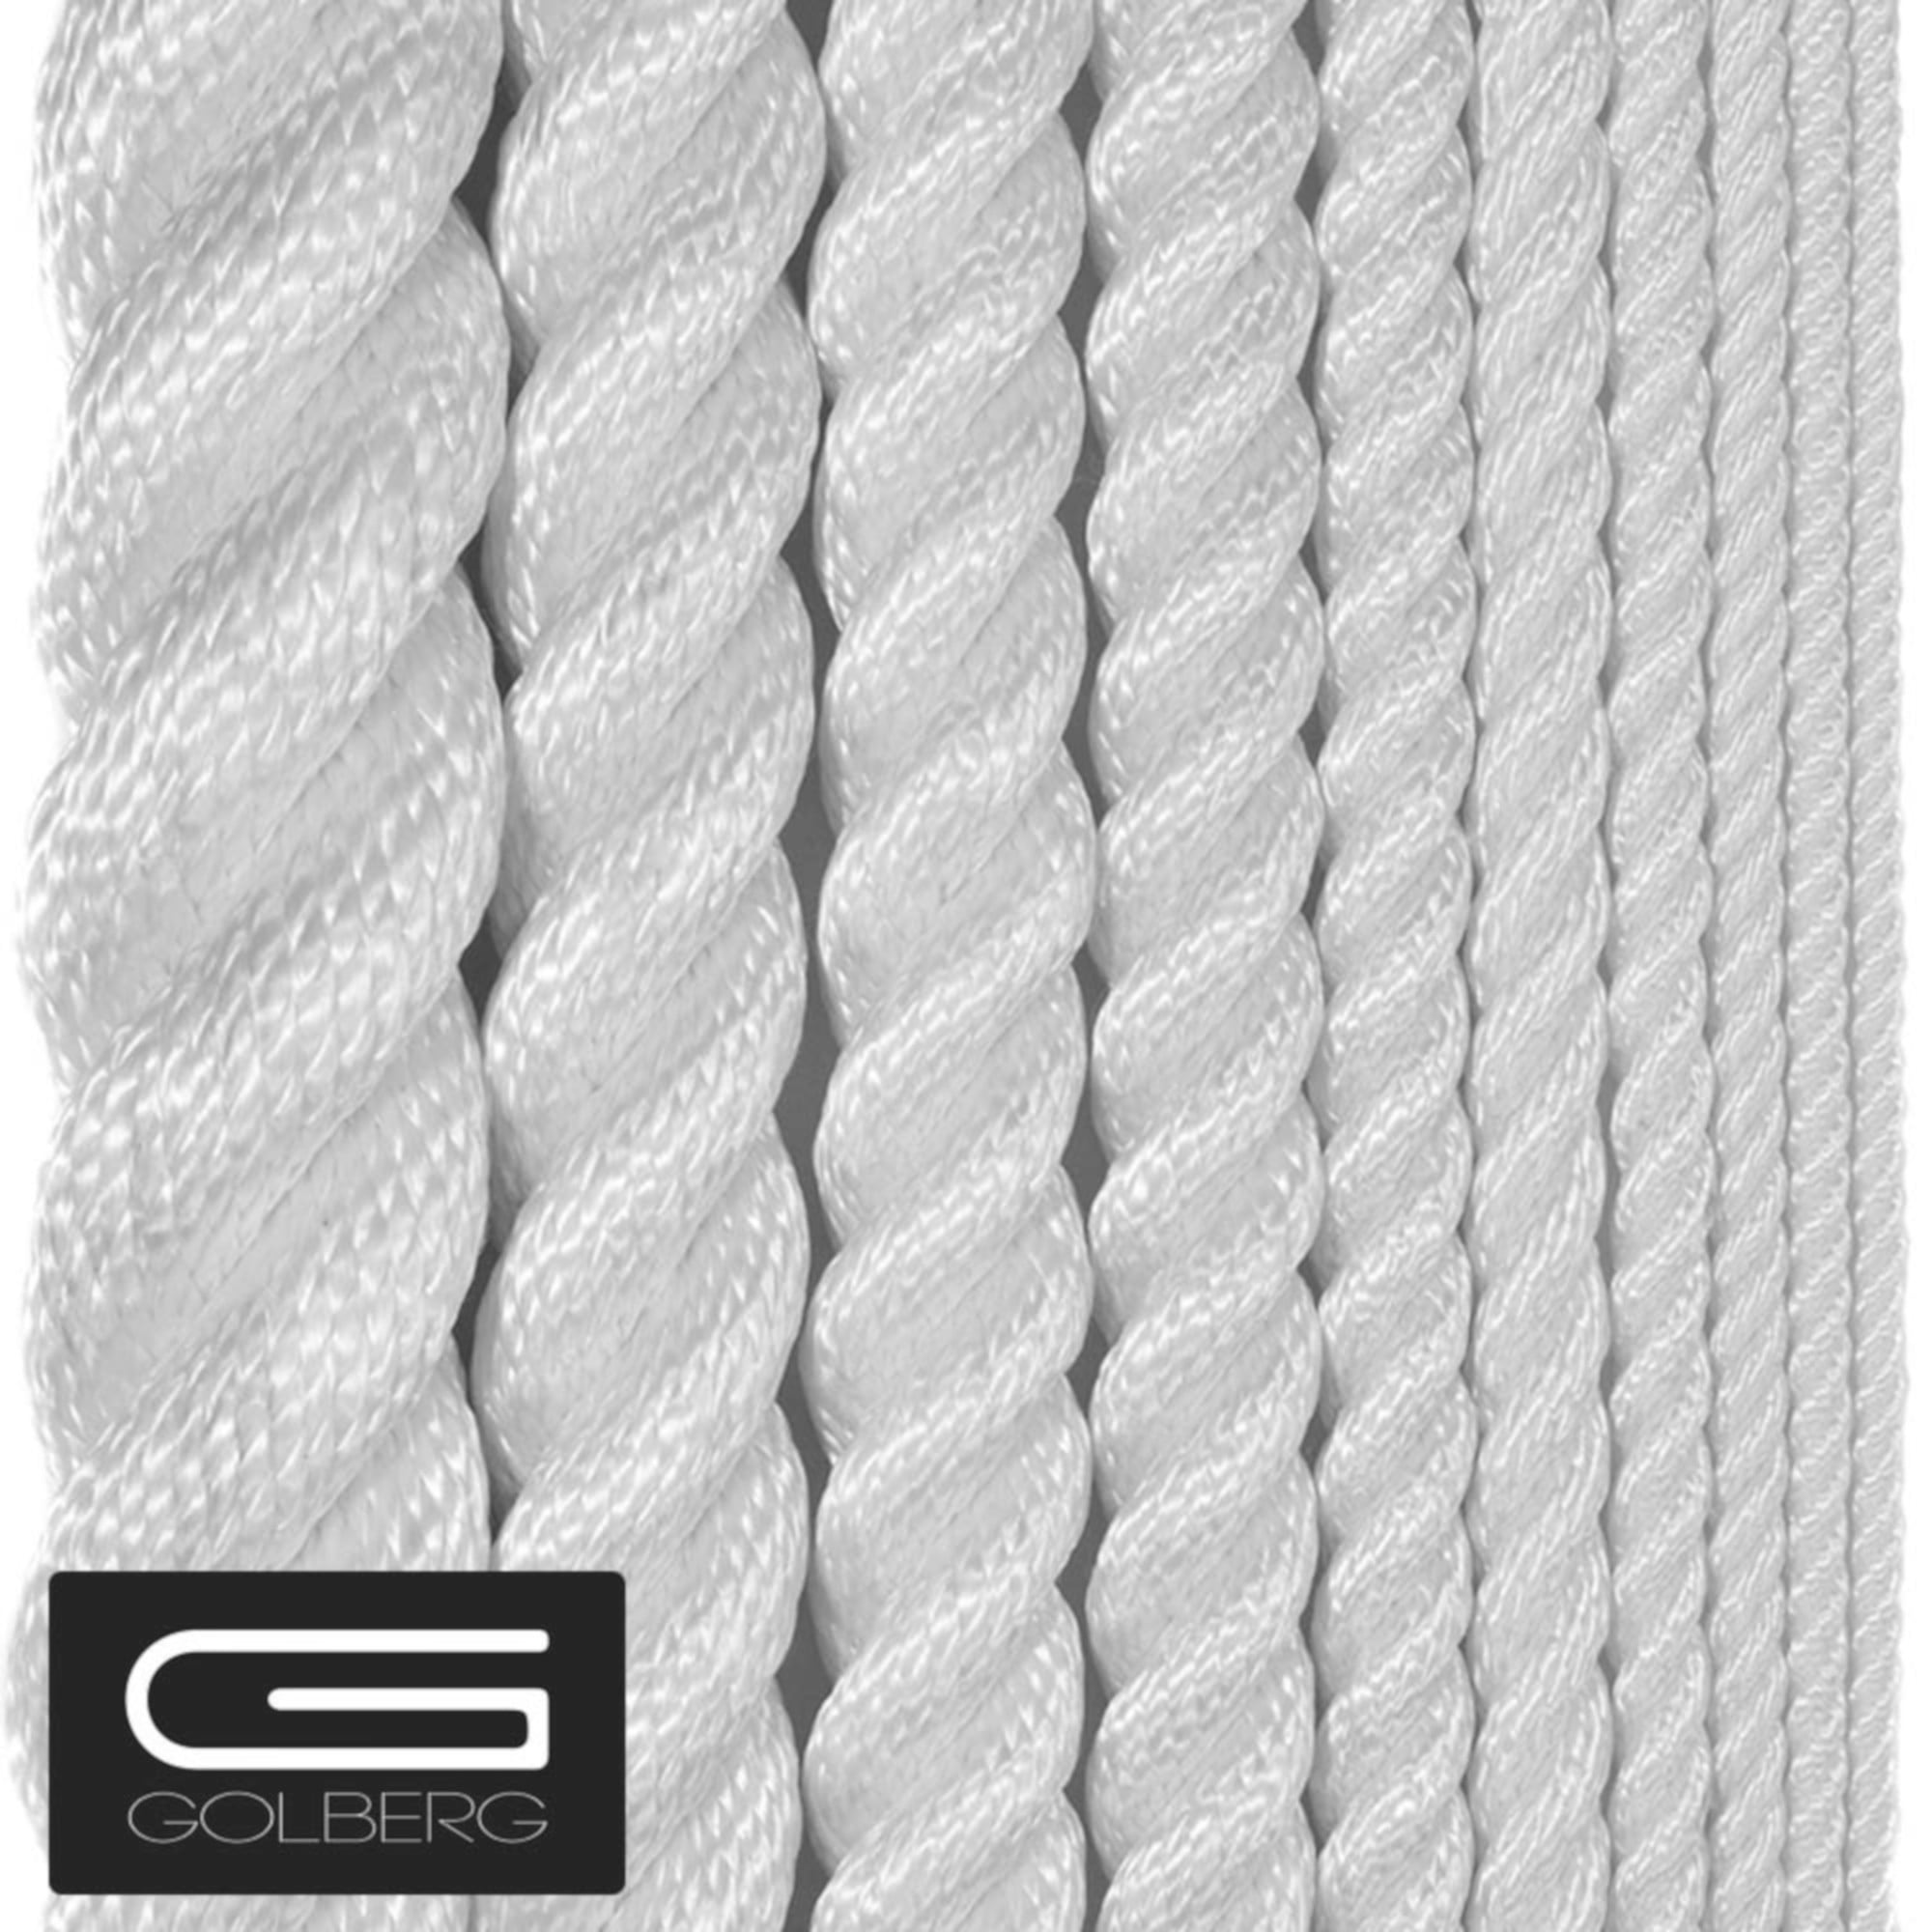 Choose from 1/4 inch or 5/16 inch Diameter Colors Available in 5 Lengths and 20 GOLBERG Nylon Paramax Utility Cord 